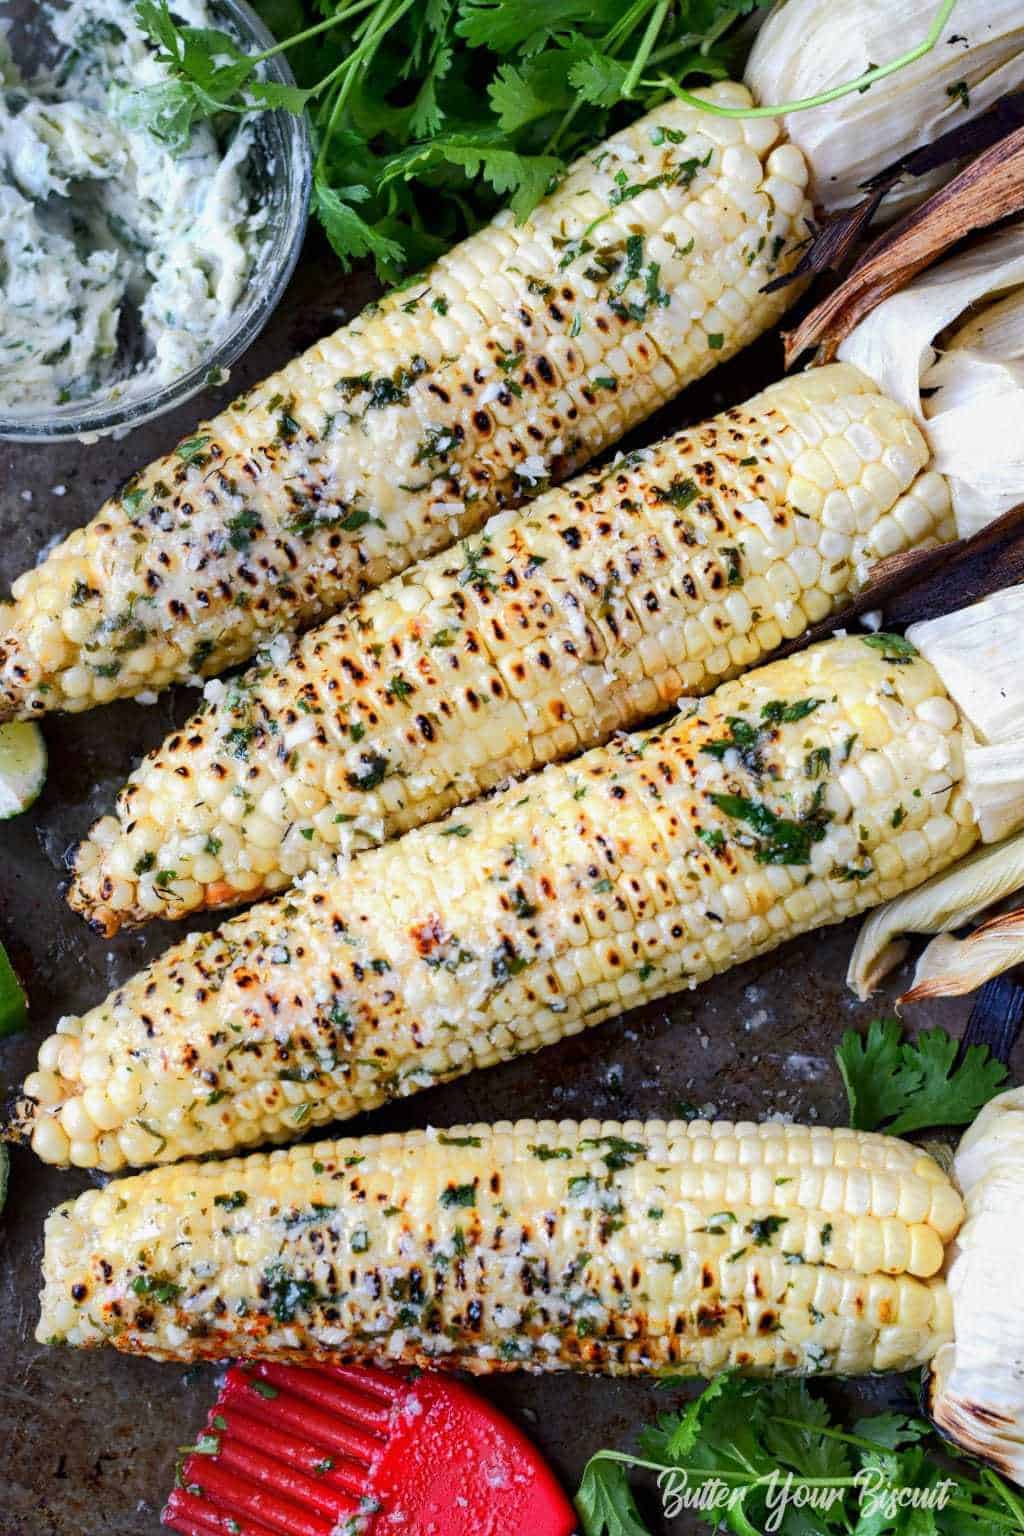 Four ears of grilled corn with cilantro lime butter spread on top.